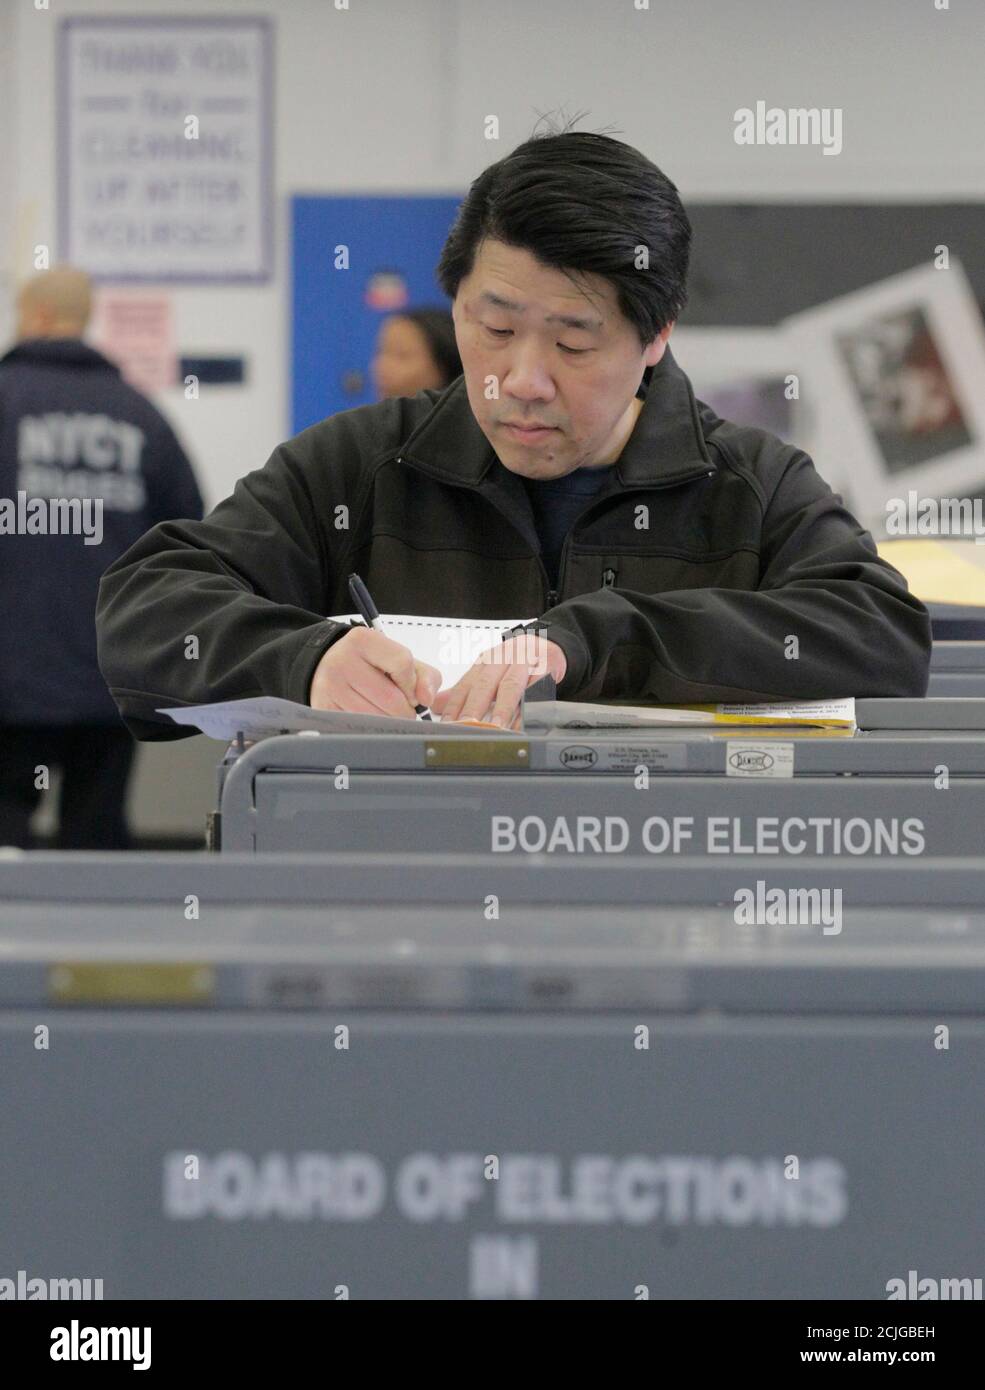 A man looks over his ballot to vote in the U.S. presidential election at a displaced polling center in the Coney Island section of Brooklyn, New York November 6, 2012.  All of the Coney Island and surrounding area polling sites were damaged during Hurricane Sandy. REUTERS/Brendan McDermid (UNITED STATES - Tags: POLITICS ELECTIONS DISASTER USA PRESIDENTIAL ELECTION) Stock Photo